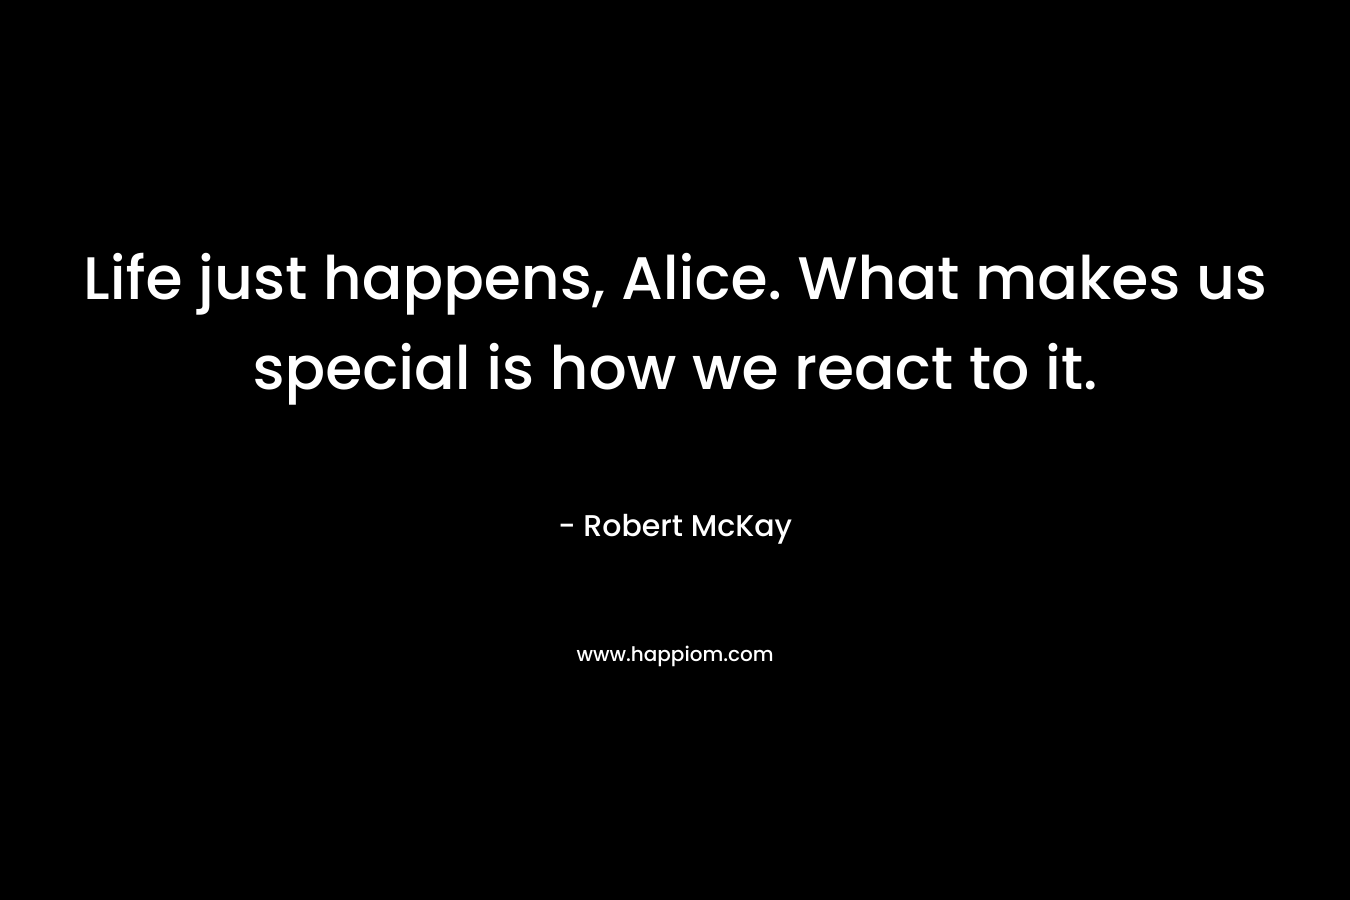 Life just happens, Alice. What makes us special is how we react to it.